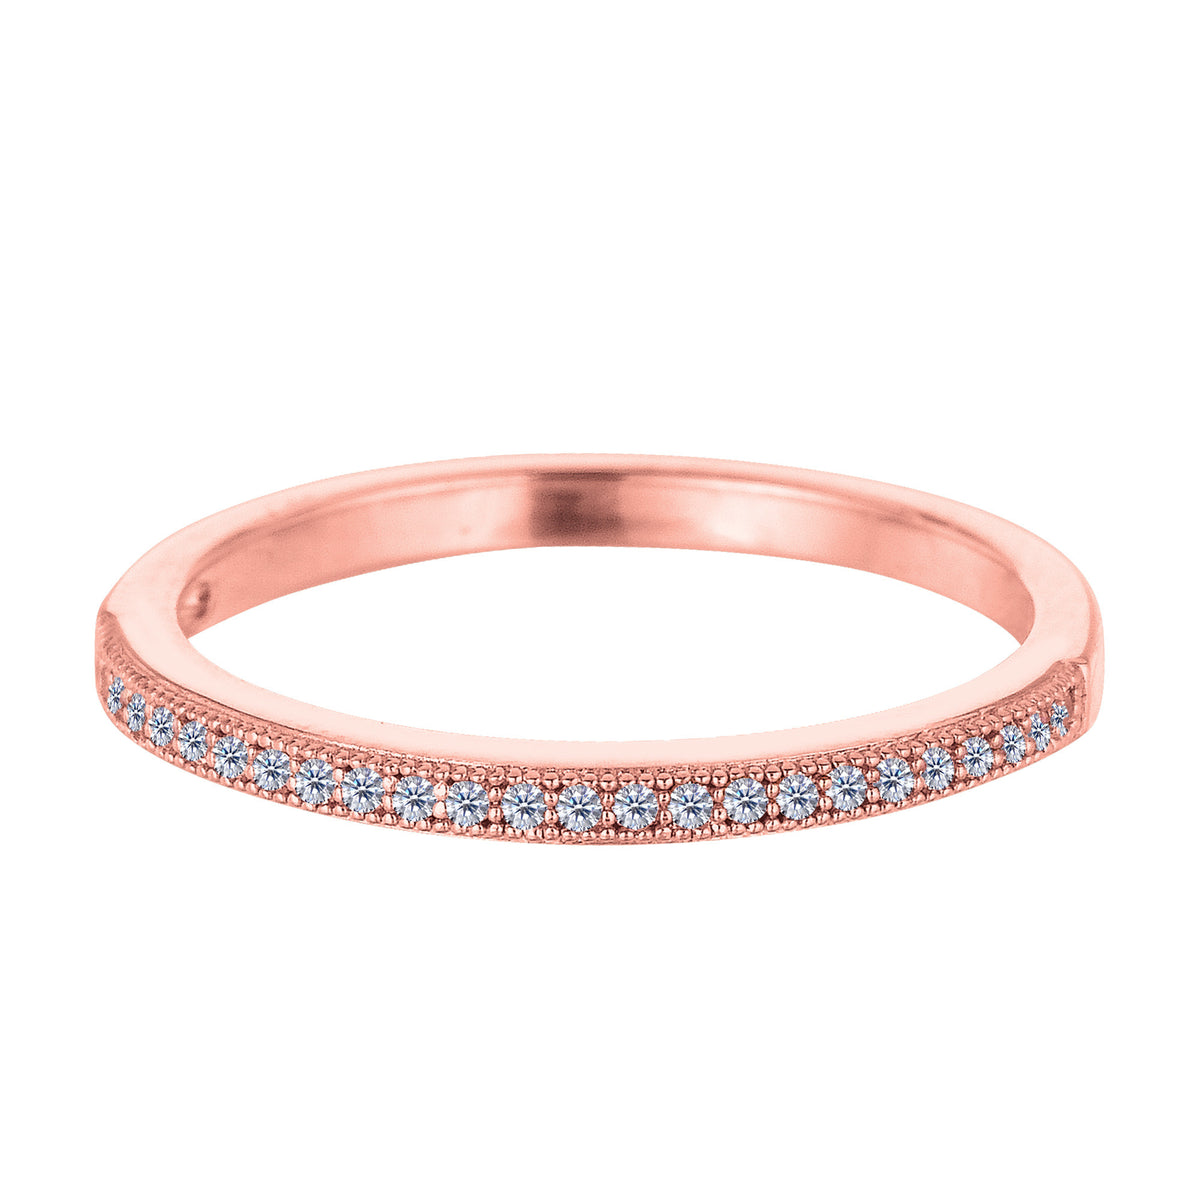 Sterling Silver Rose Tone Finish Milgrain Stackable Ring With Pave' Set Cz Stones fine designer jewelry for men and women